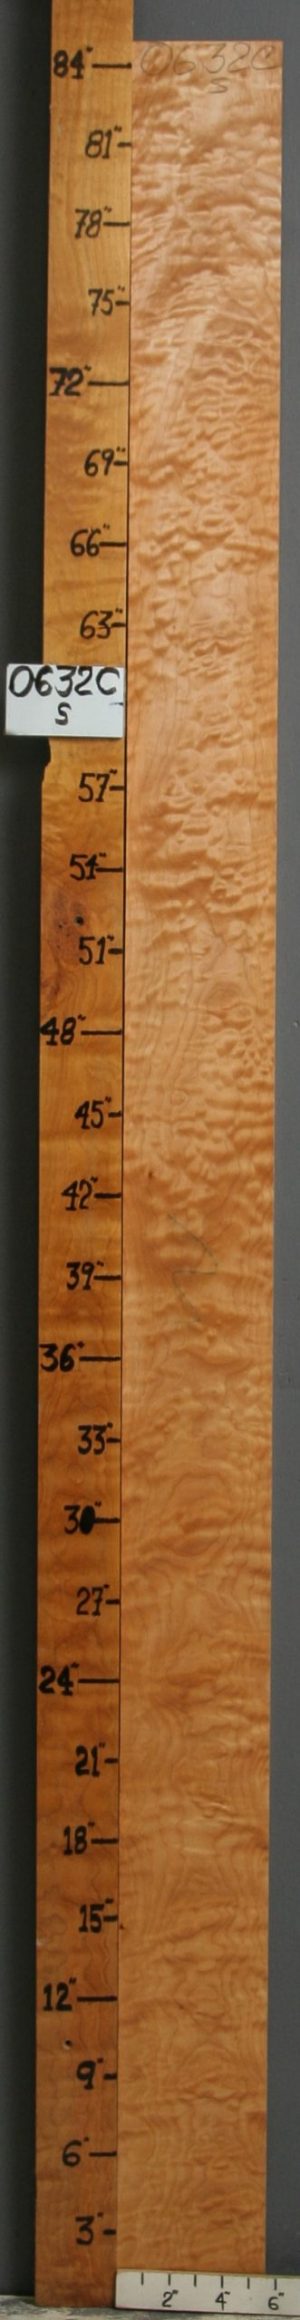 MUSICAL QUILTED MAPLE LUMBER 5"1/2 X 85" X 4/4 (NWT-0632C)